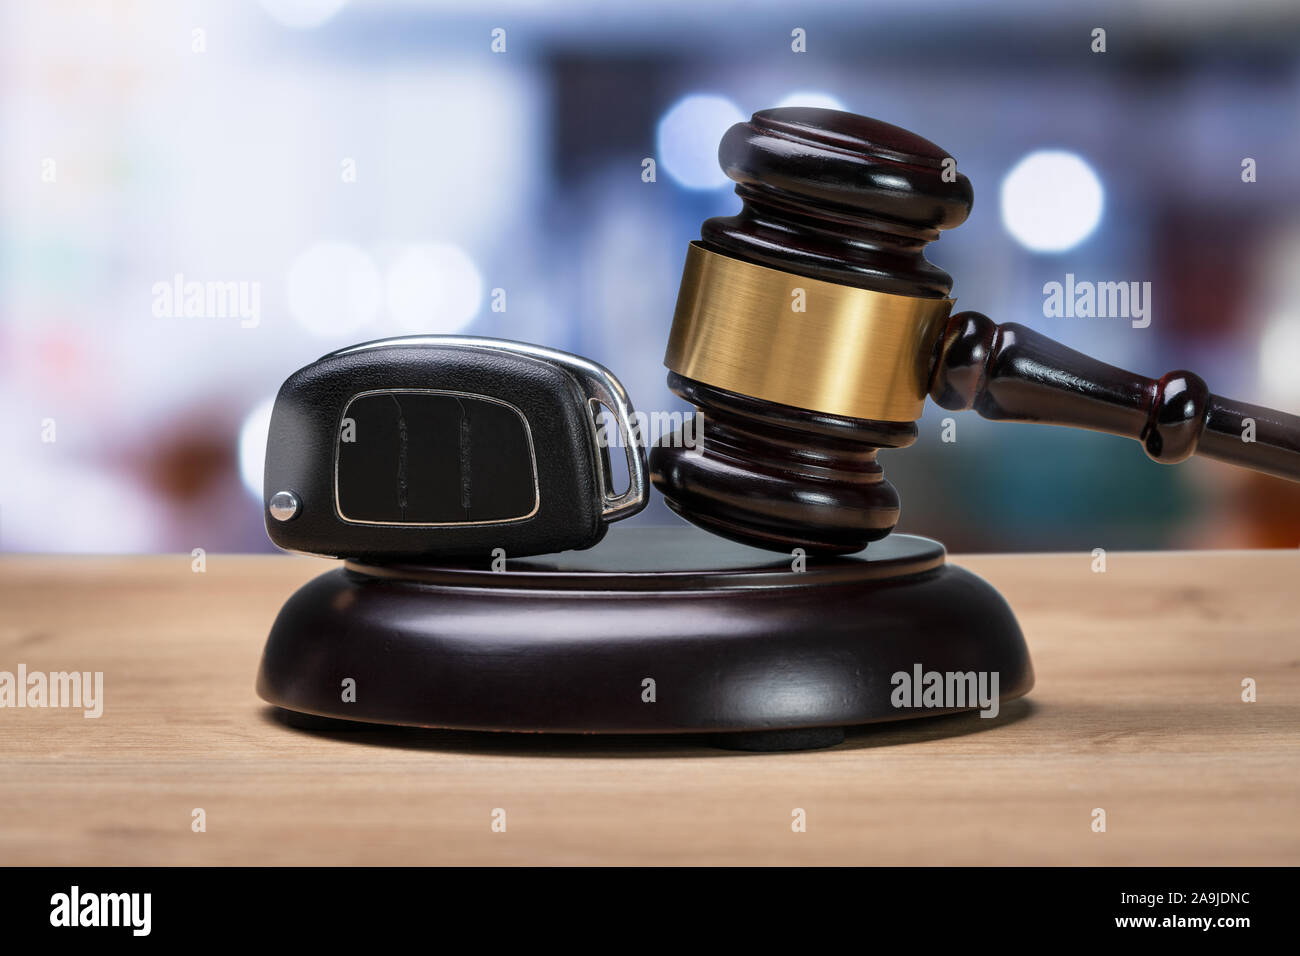 Close-up Of A Gavel And Car Key On The Striking Block Over Wooden Desk Stock Photo